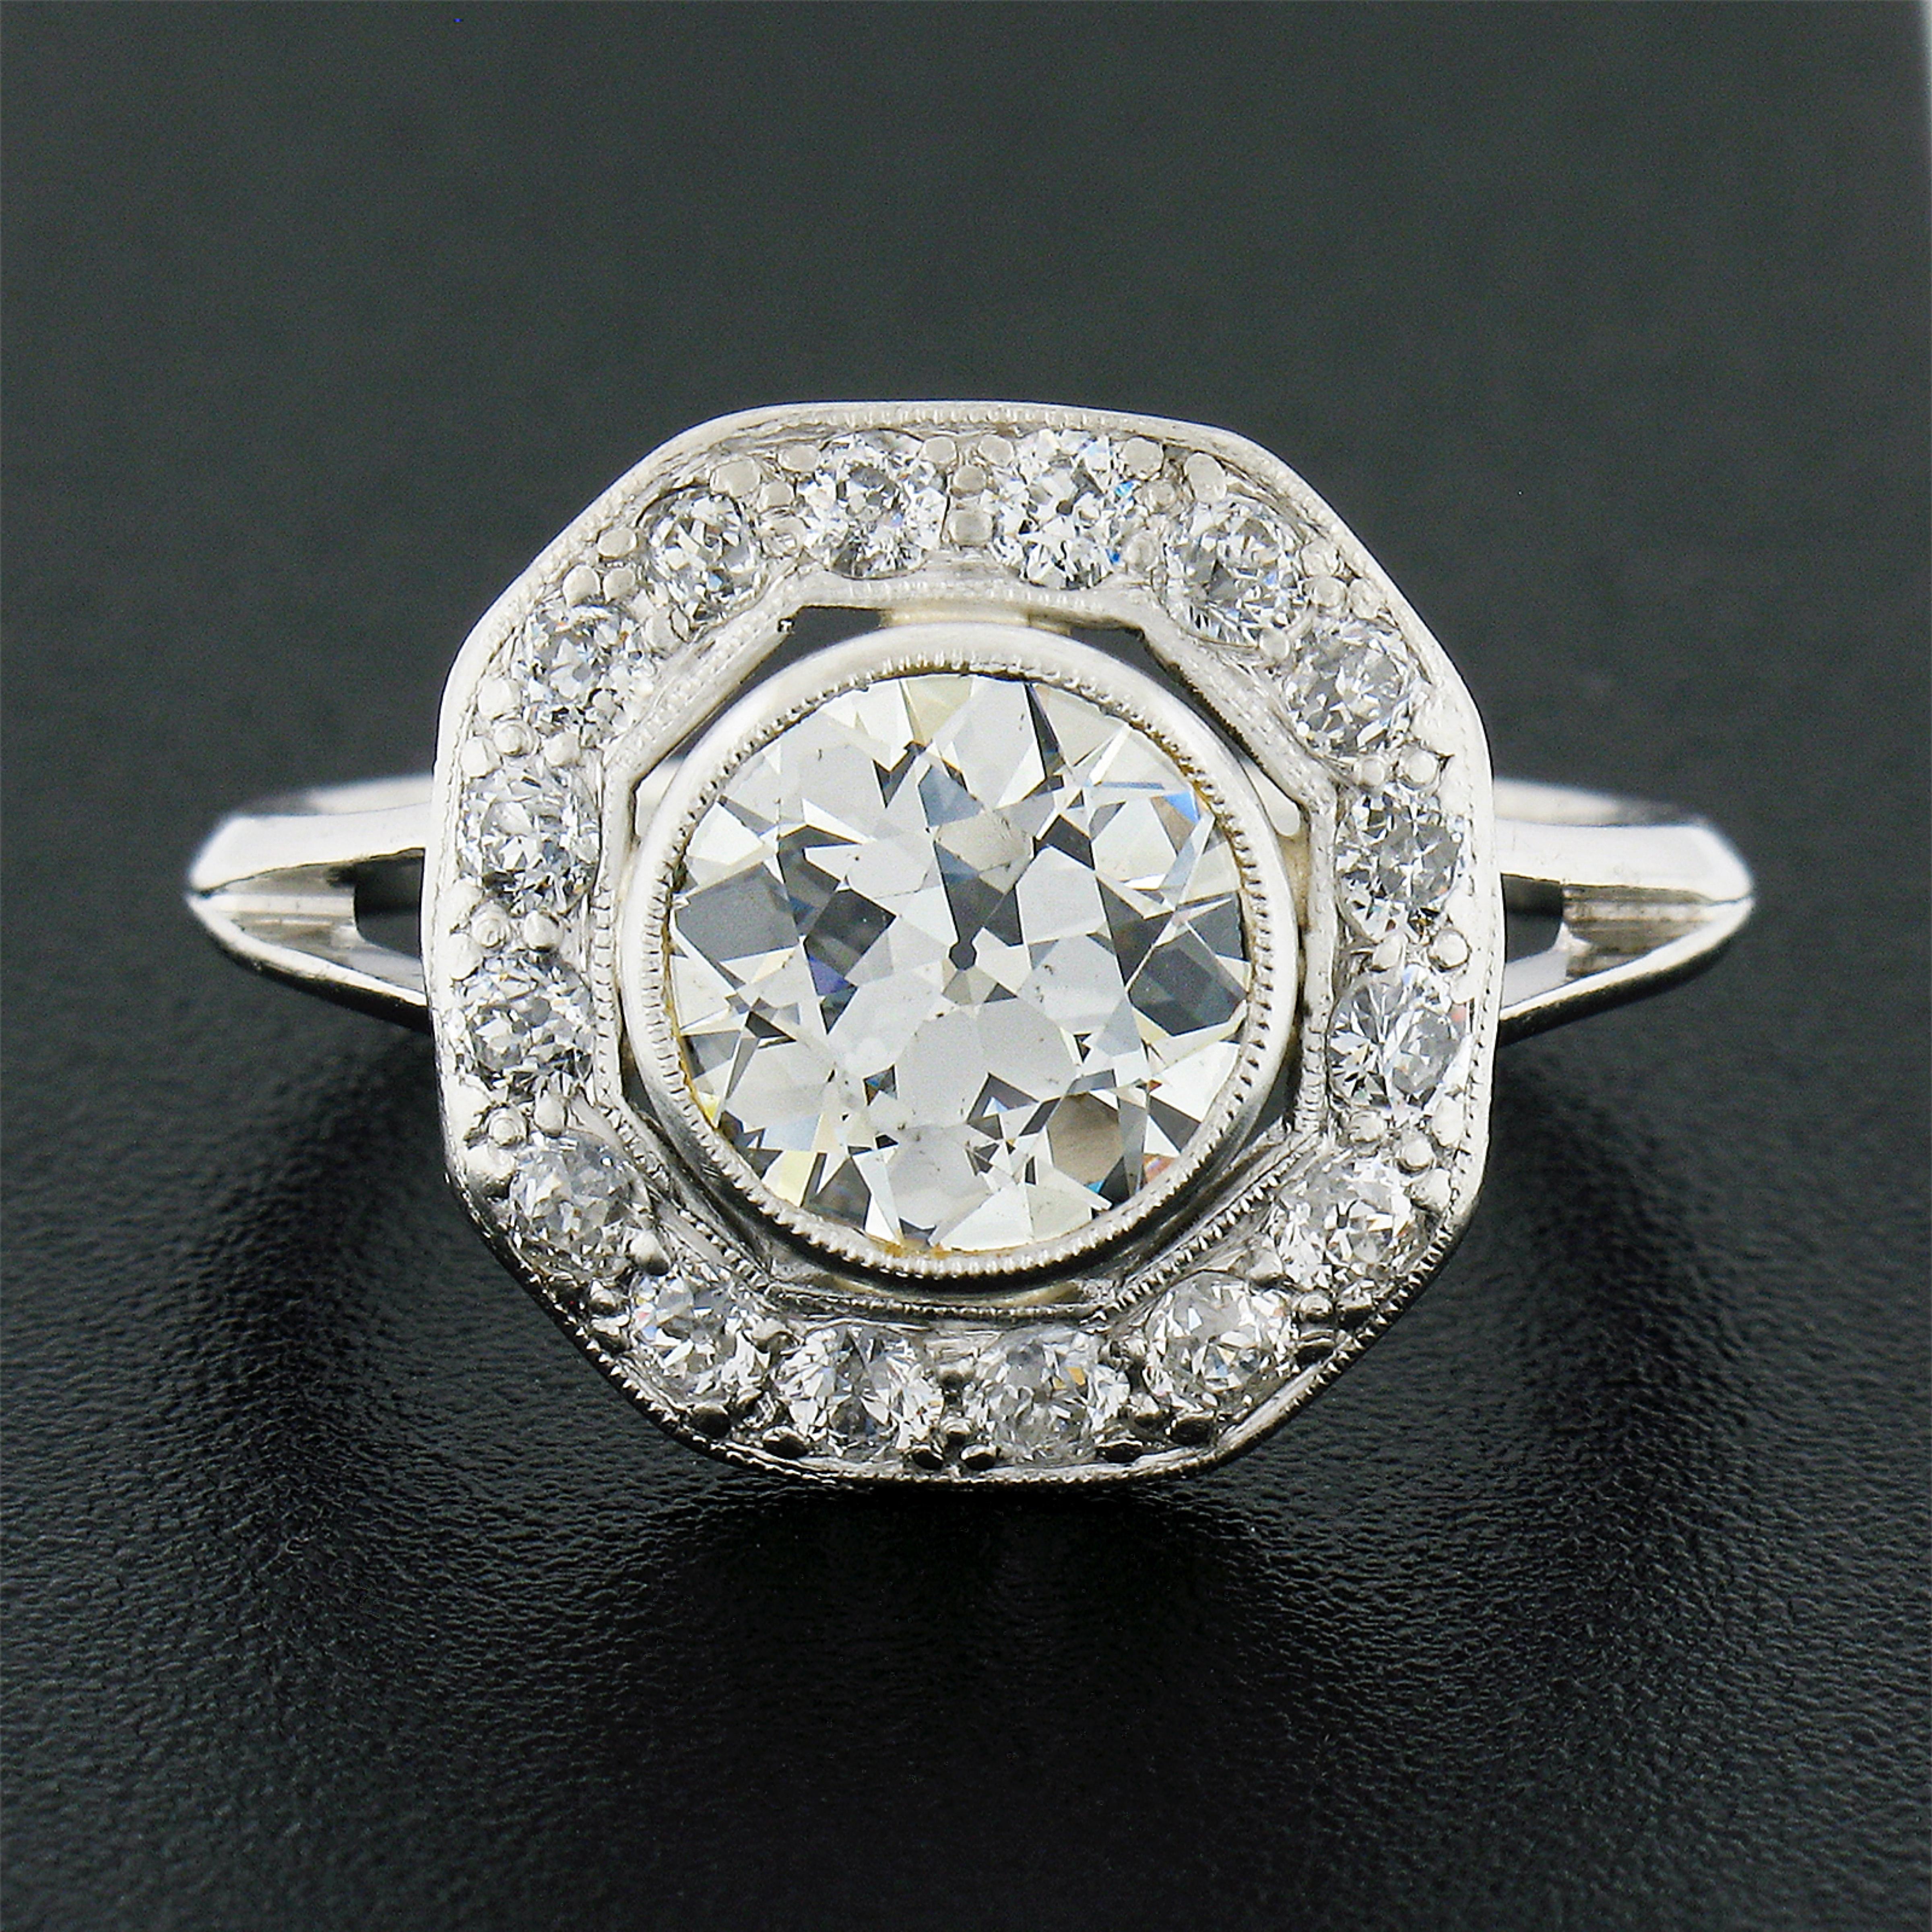 This is an absolutely jaw dropping antique platter ring crafted in solid platinum during the Edwardian period. It features a large and breathtaking old European diamond solitaire neatly bezel set with milgrain at the center, and further surrounded